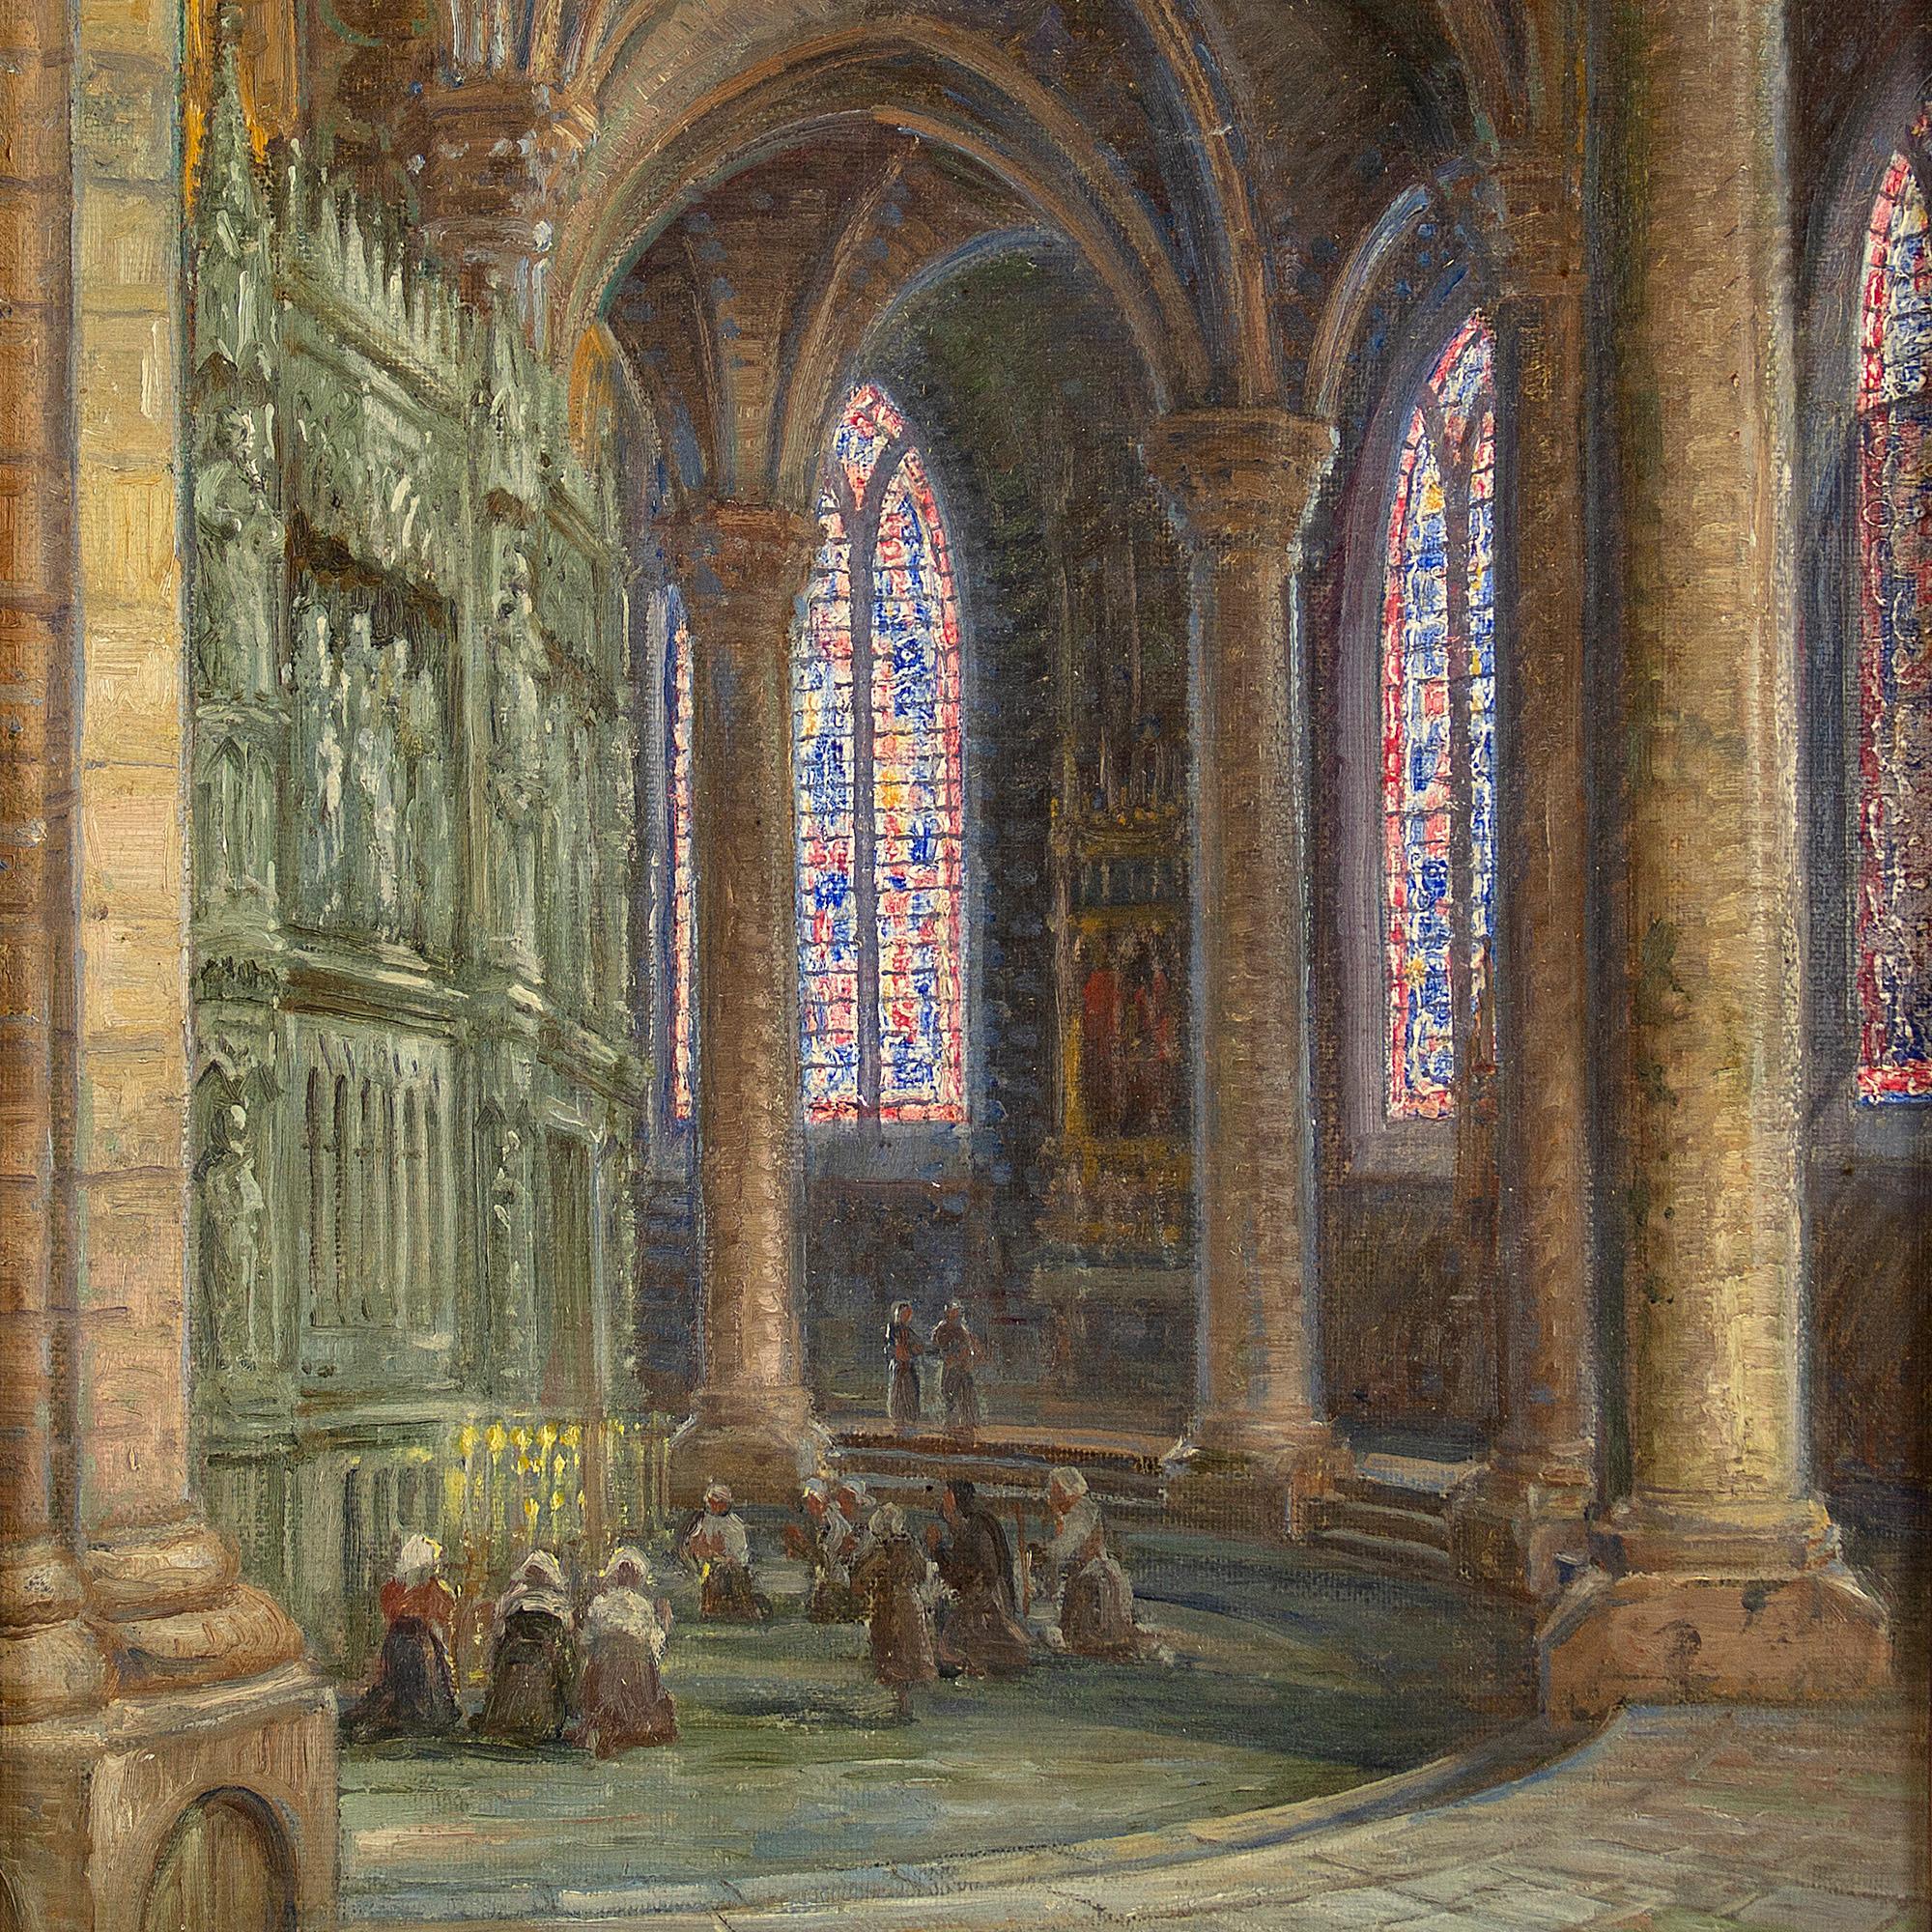 This beautiful early-20th-century oil on canvas by Danish artist Carl Budtz-Mølle (1882-1953) depicts the splendid interior of a gothic church with a rib-vault ceiling. Budtz-Mølle has rendered this sublimely and captured the architecture with